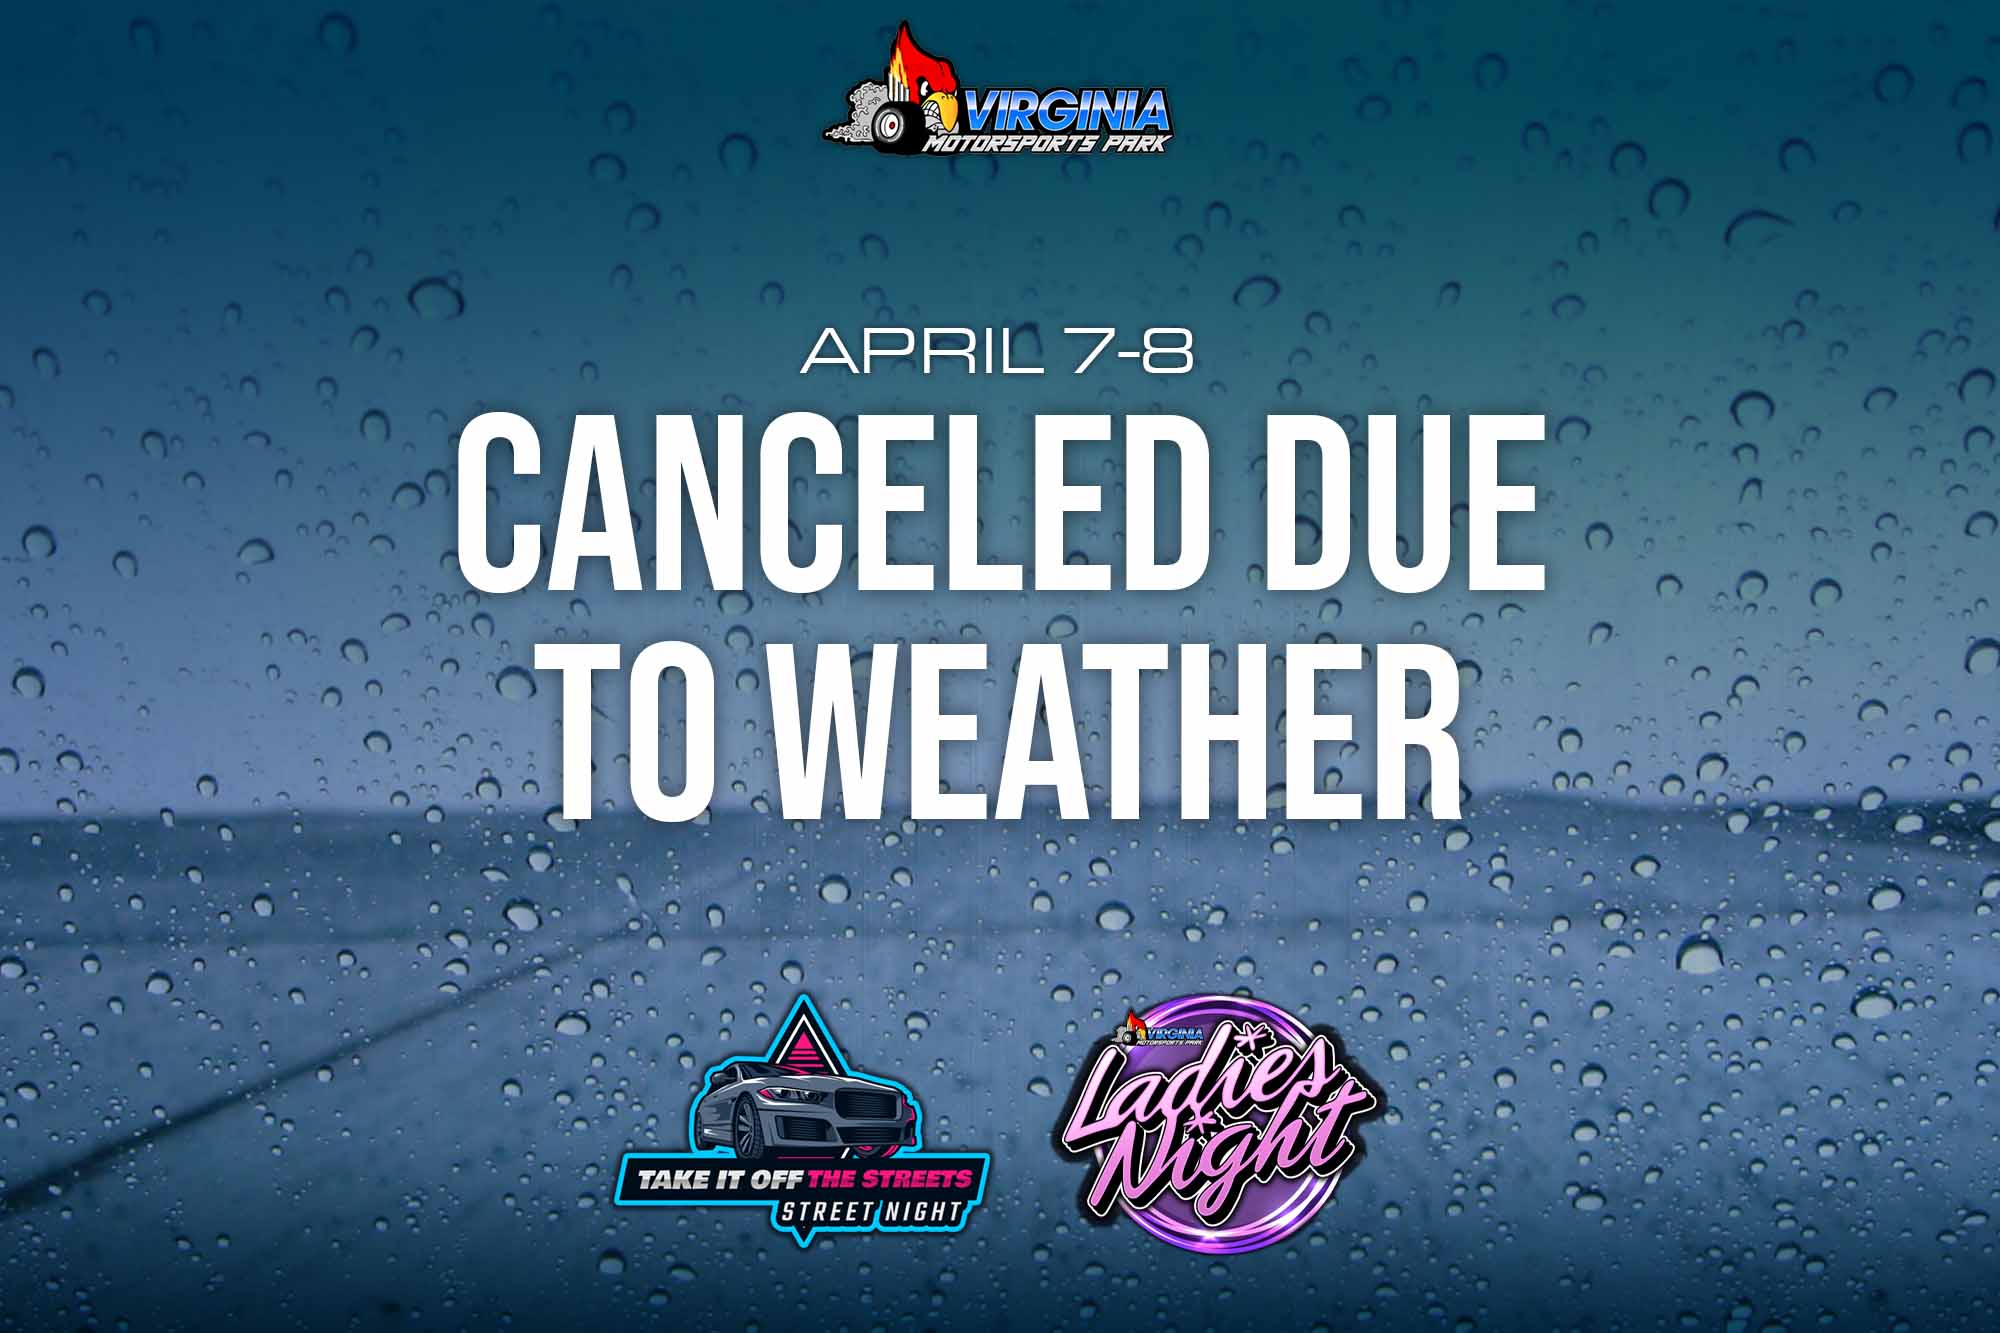 Canceled Due to Weather: Take It Off The Streets & Ladies Night (April 7-8)